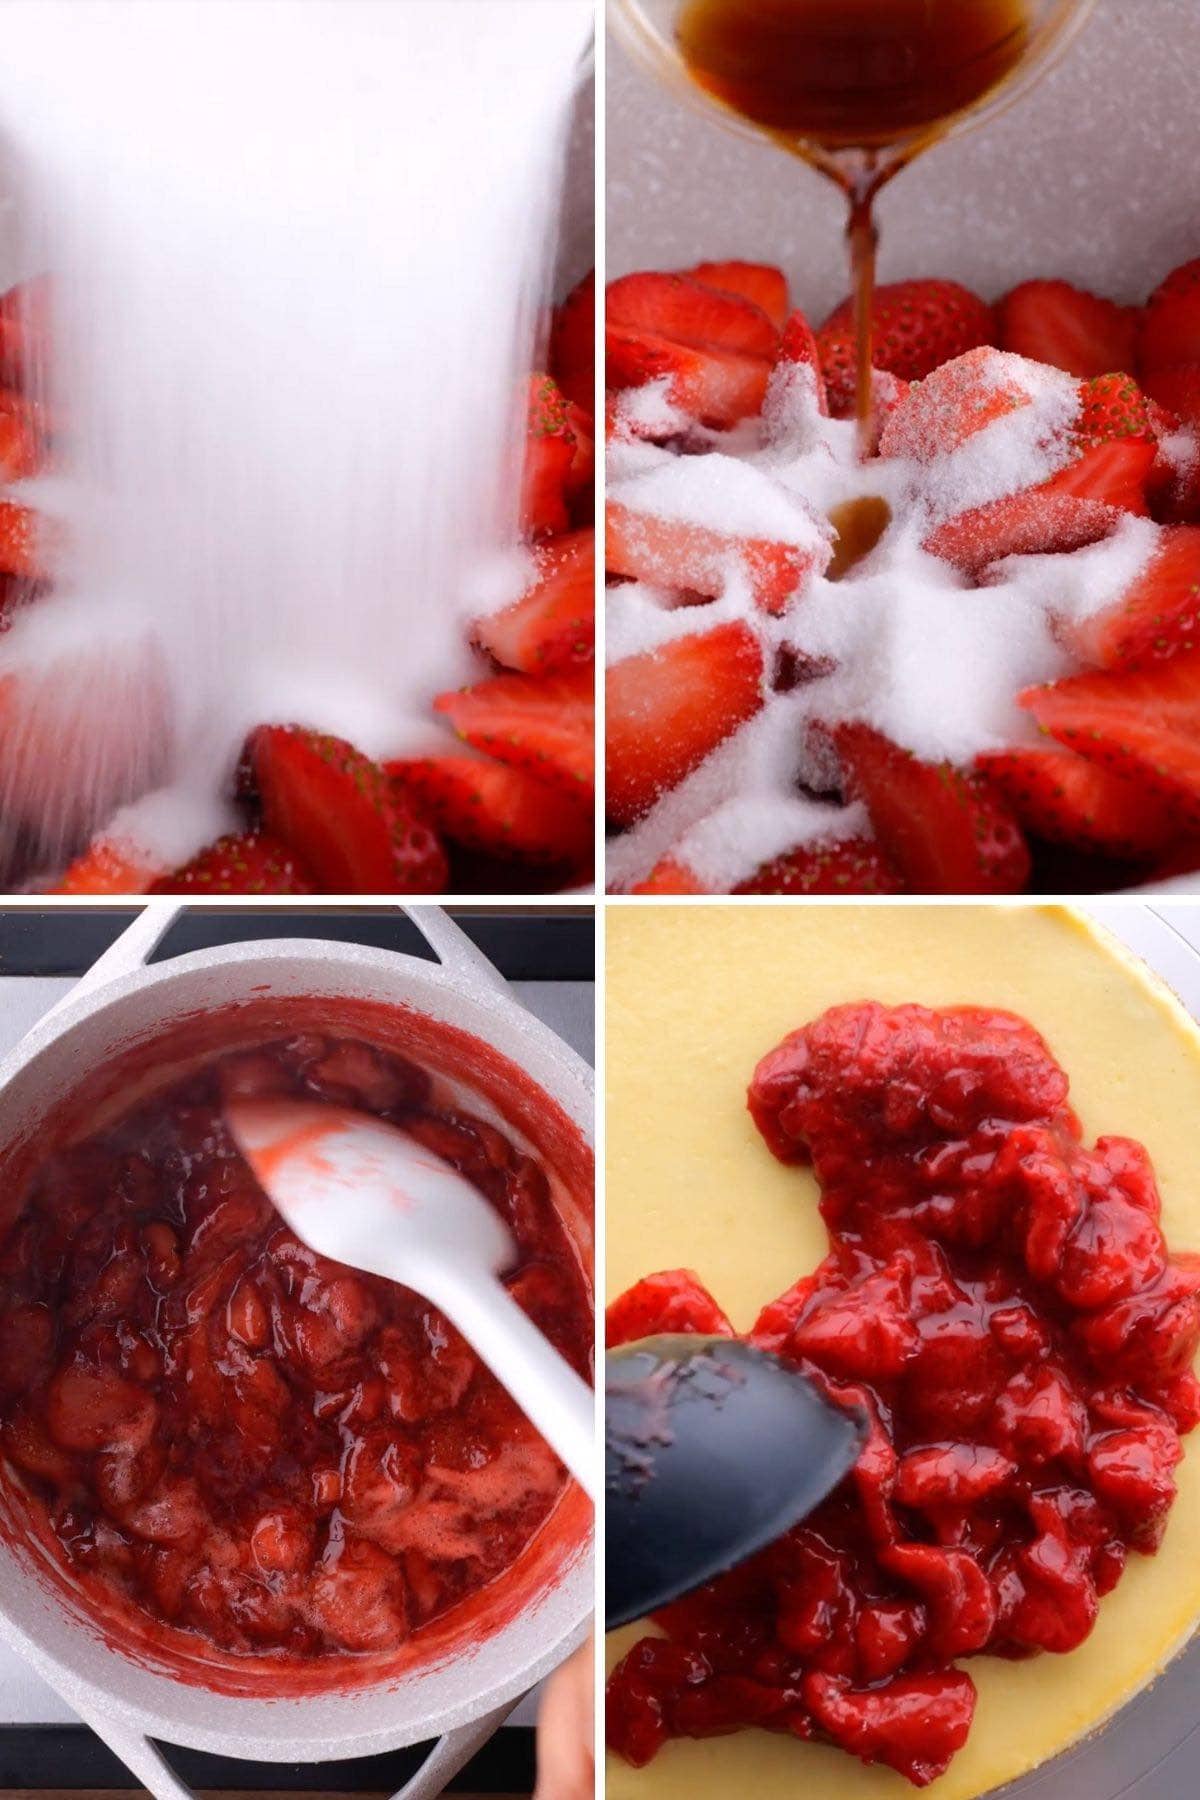 New York Cheesecake collage of strawberry topping